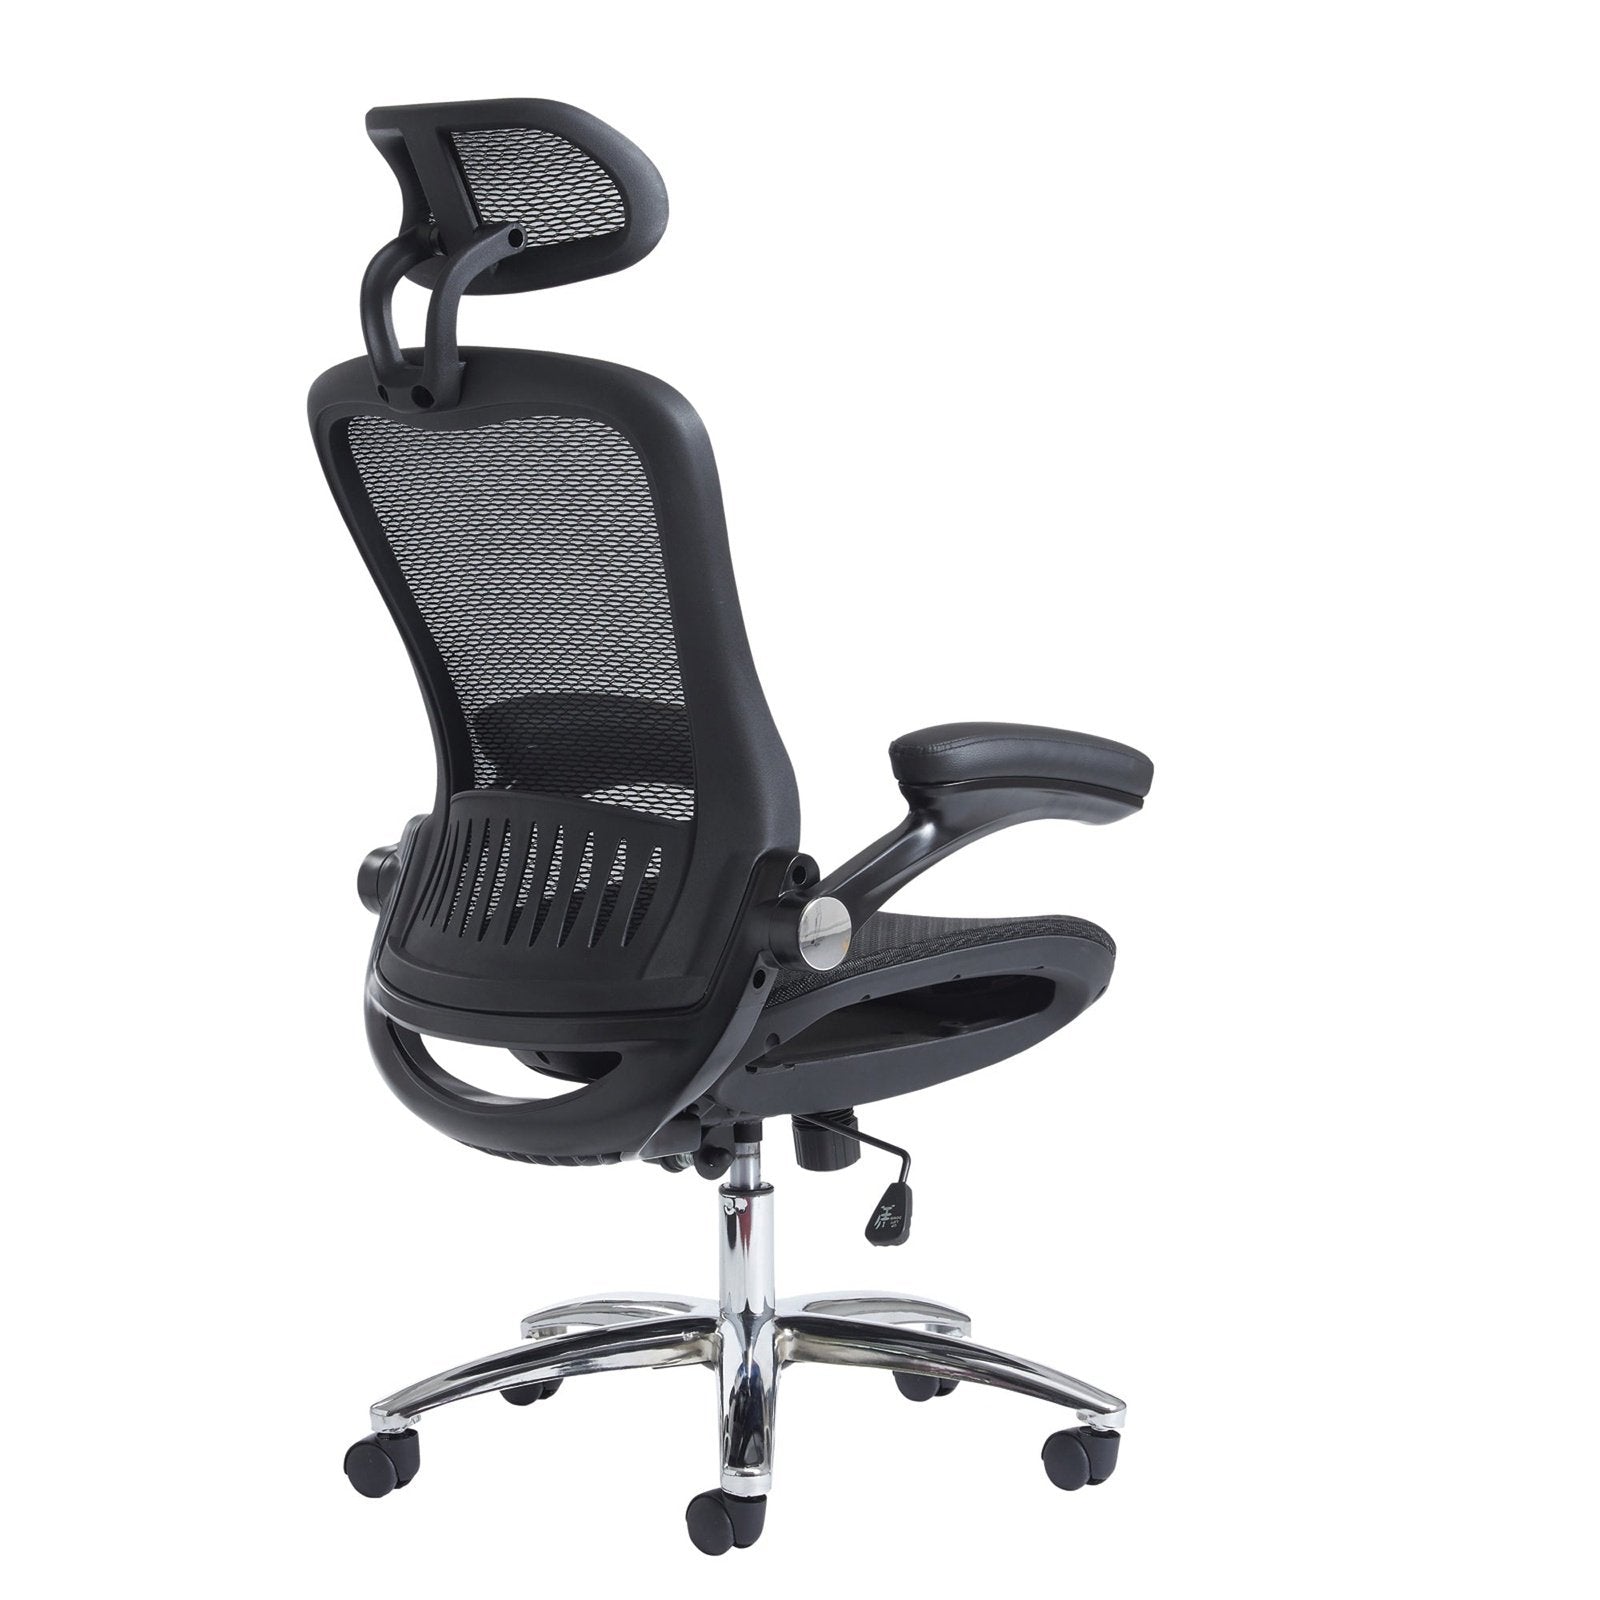 Curva high back mesh chair - black - Office Products Online